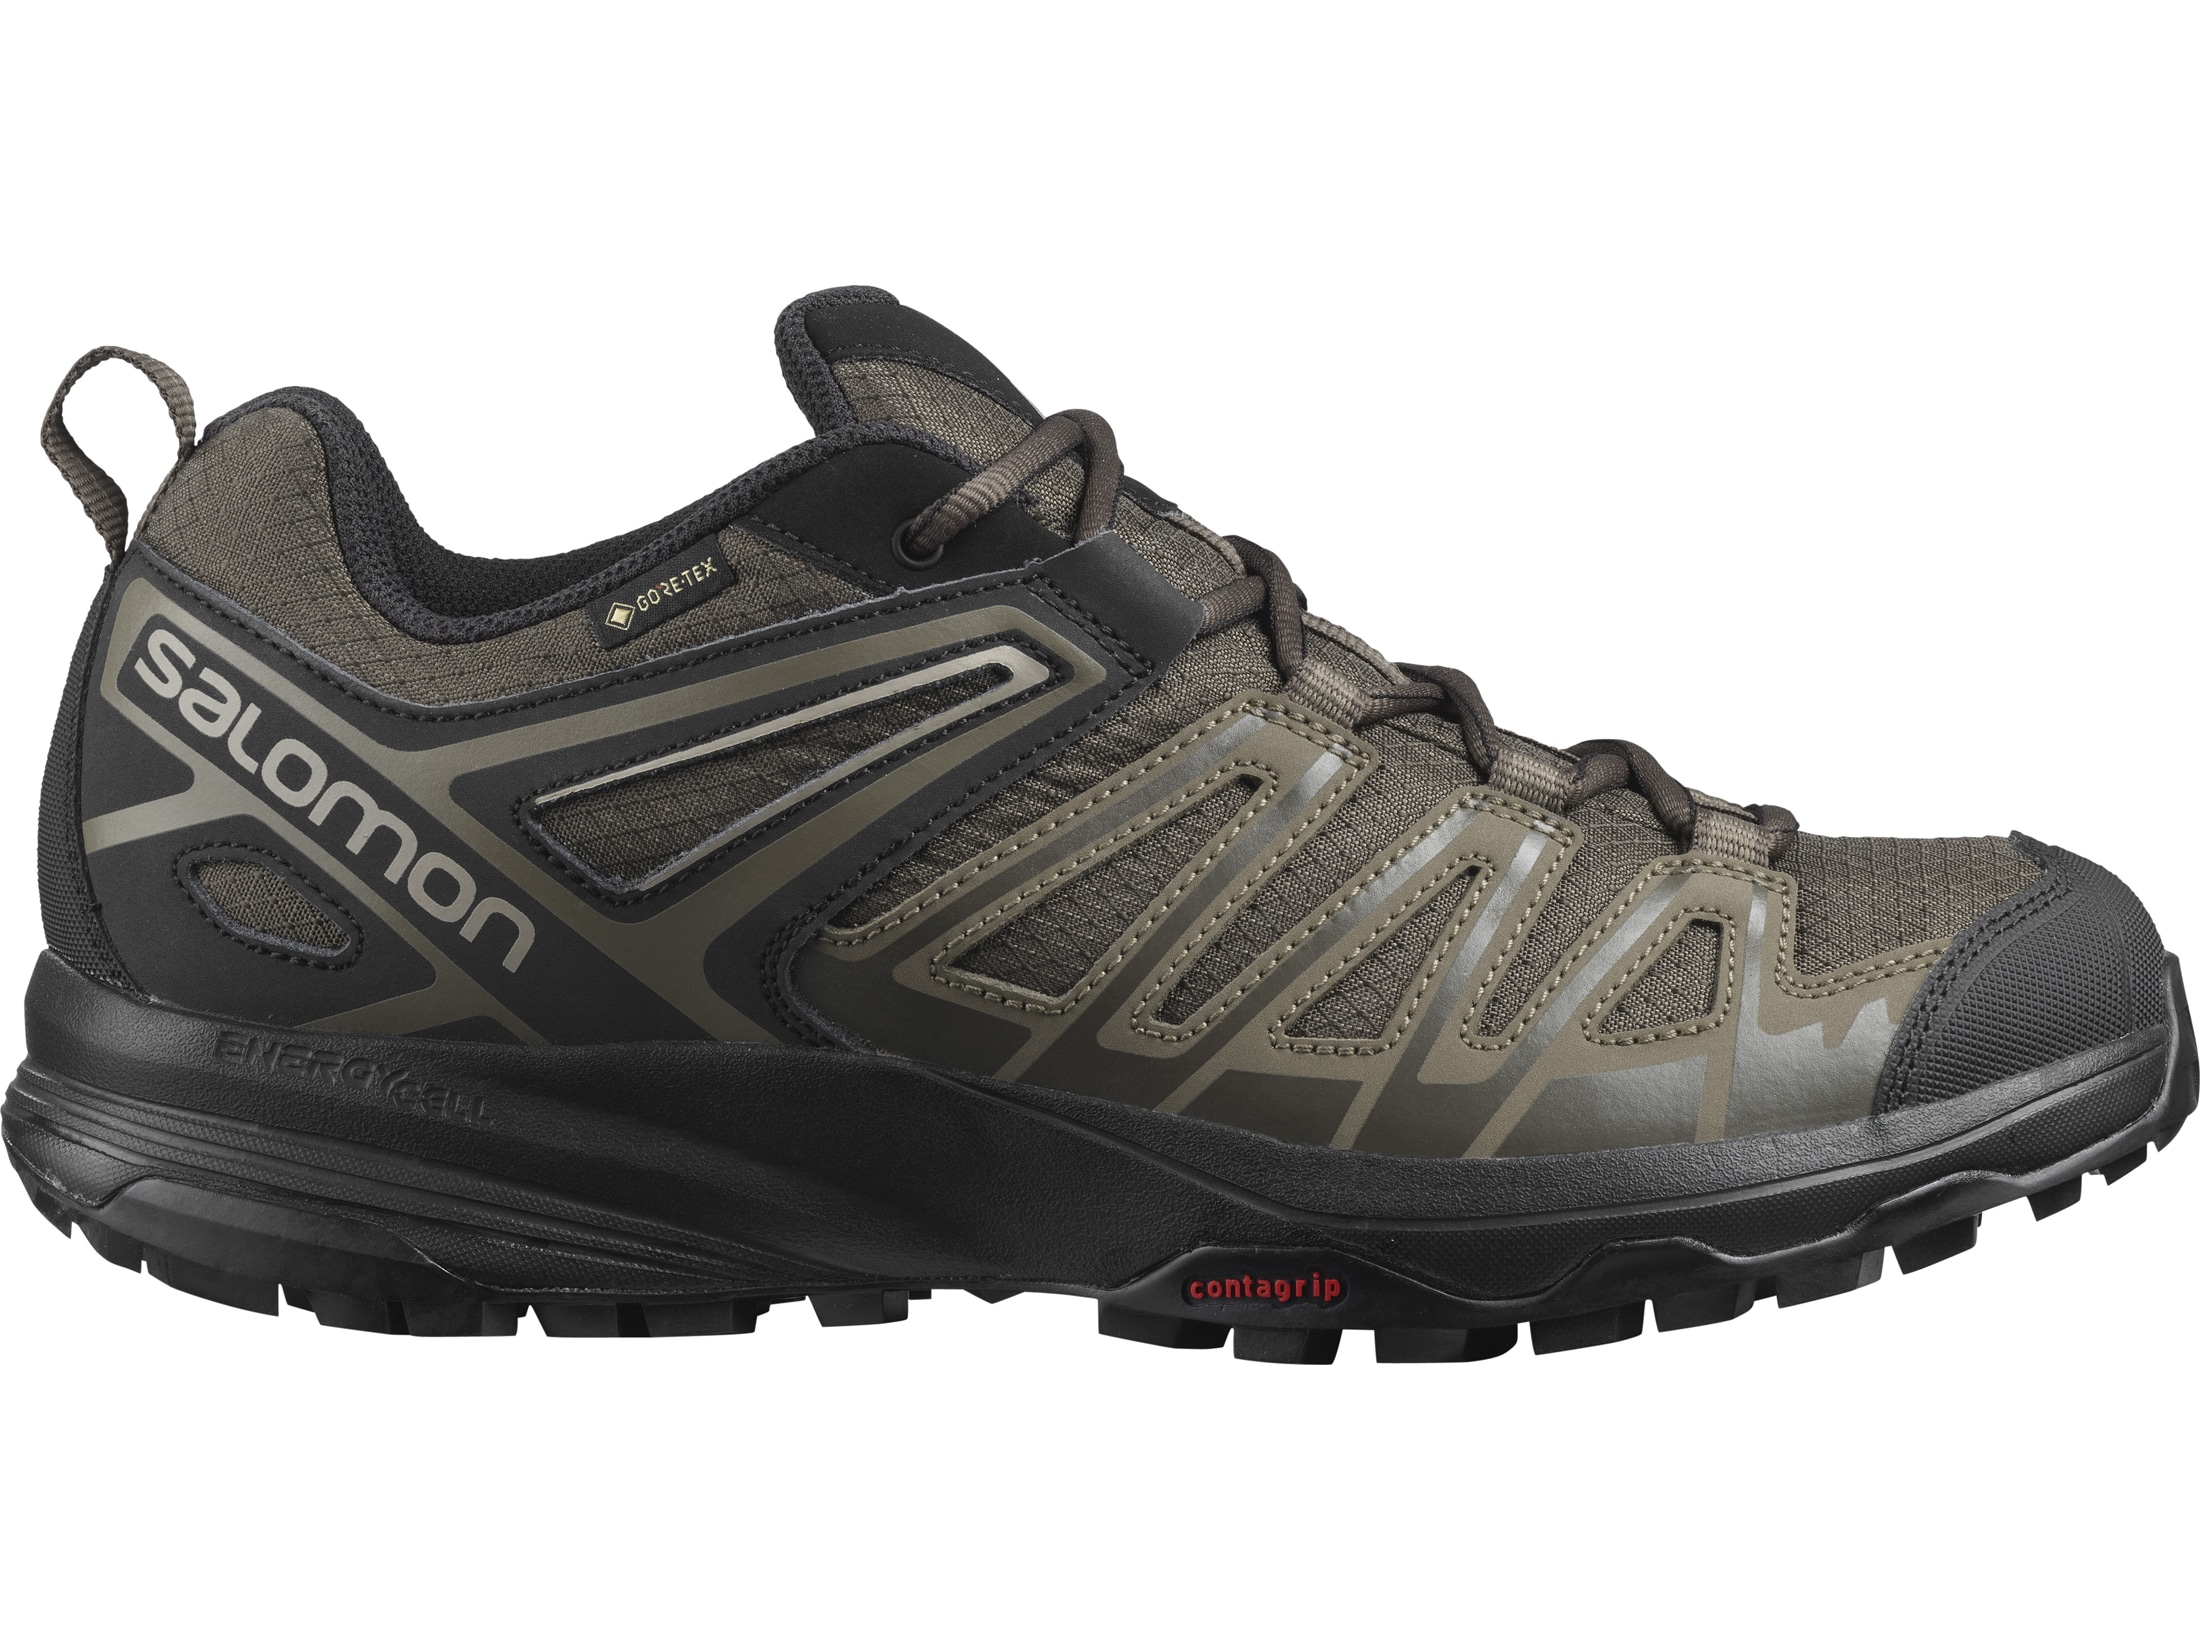 Salomon X Crest GTX Hiking Shoes Leather/Synthetic